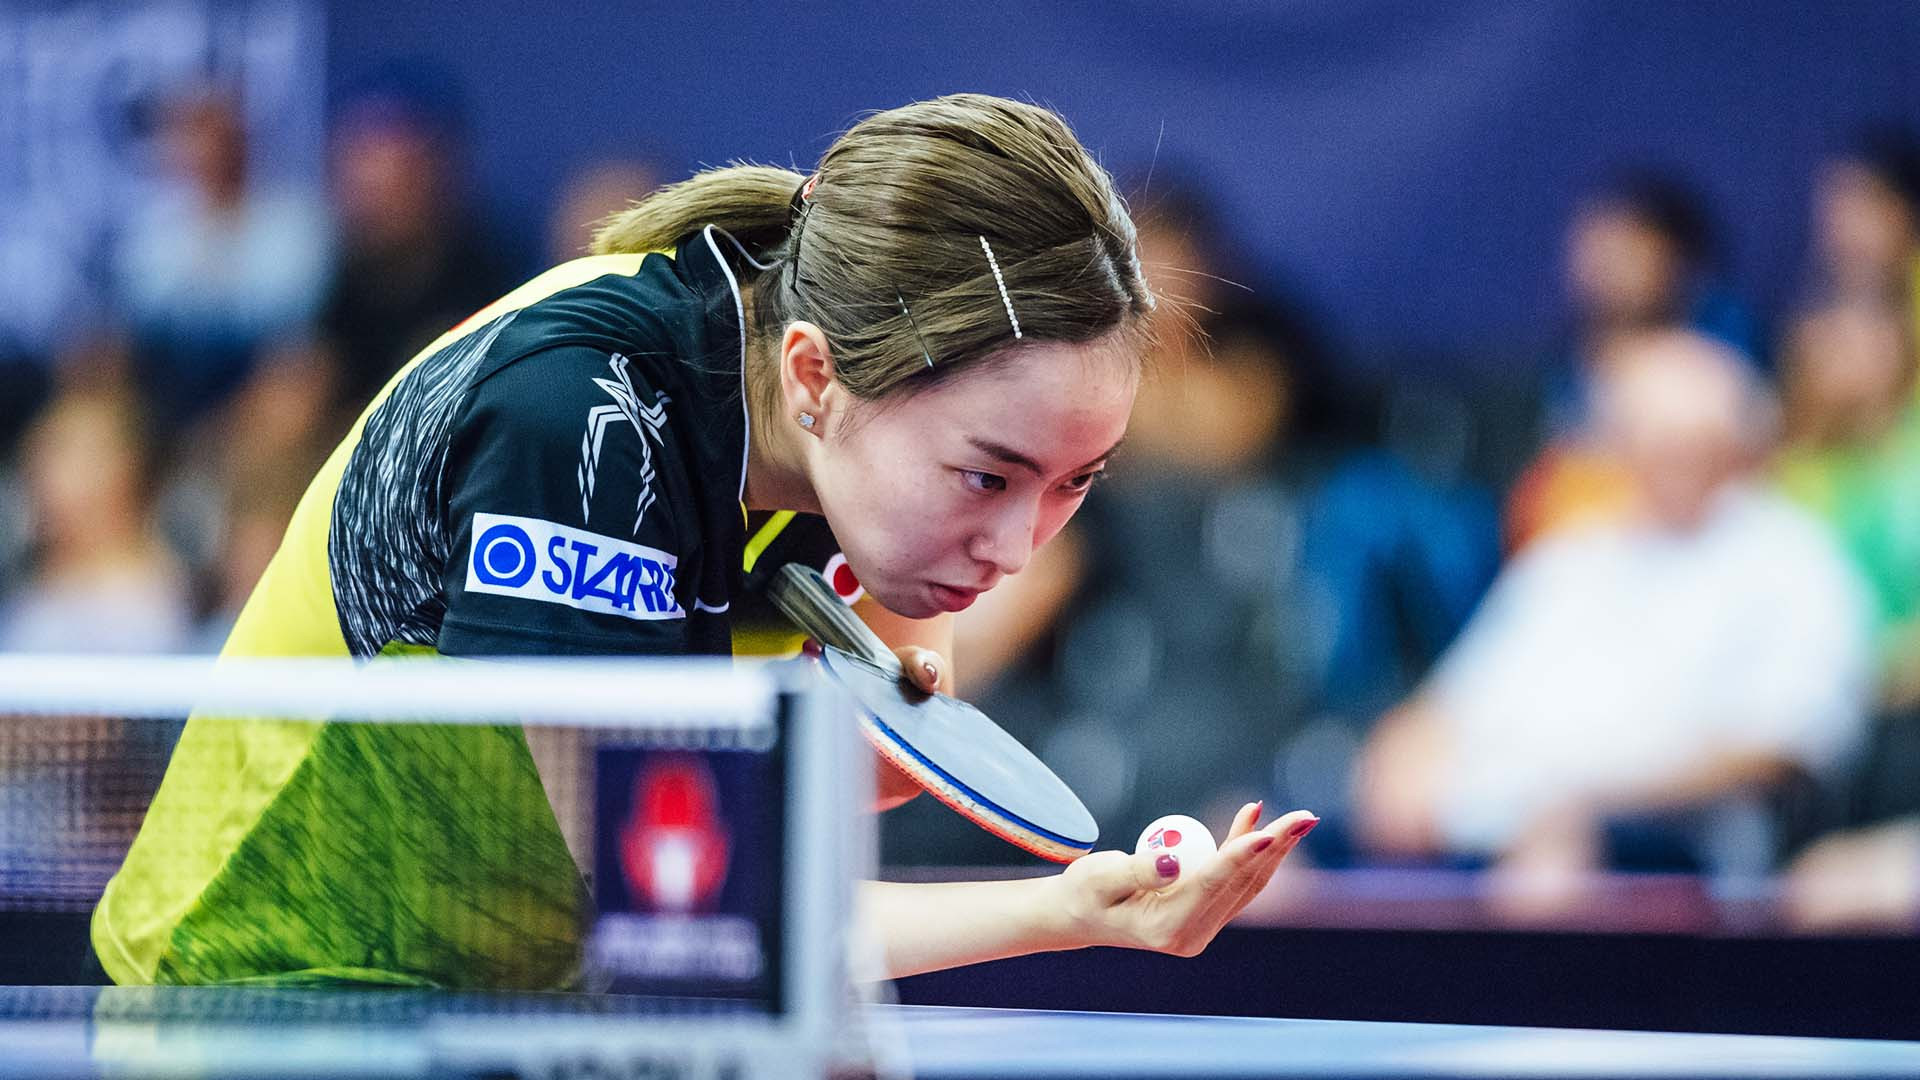 Japan's top seed Kasumi Ishikawa, runner-up in last year's women's singles final at the ITTF Czech Open, went one better today ©ITTF